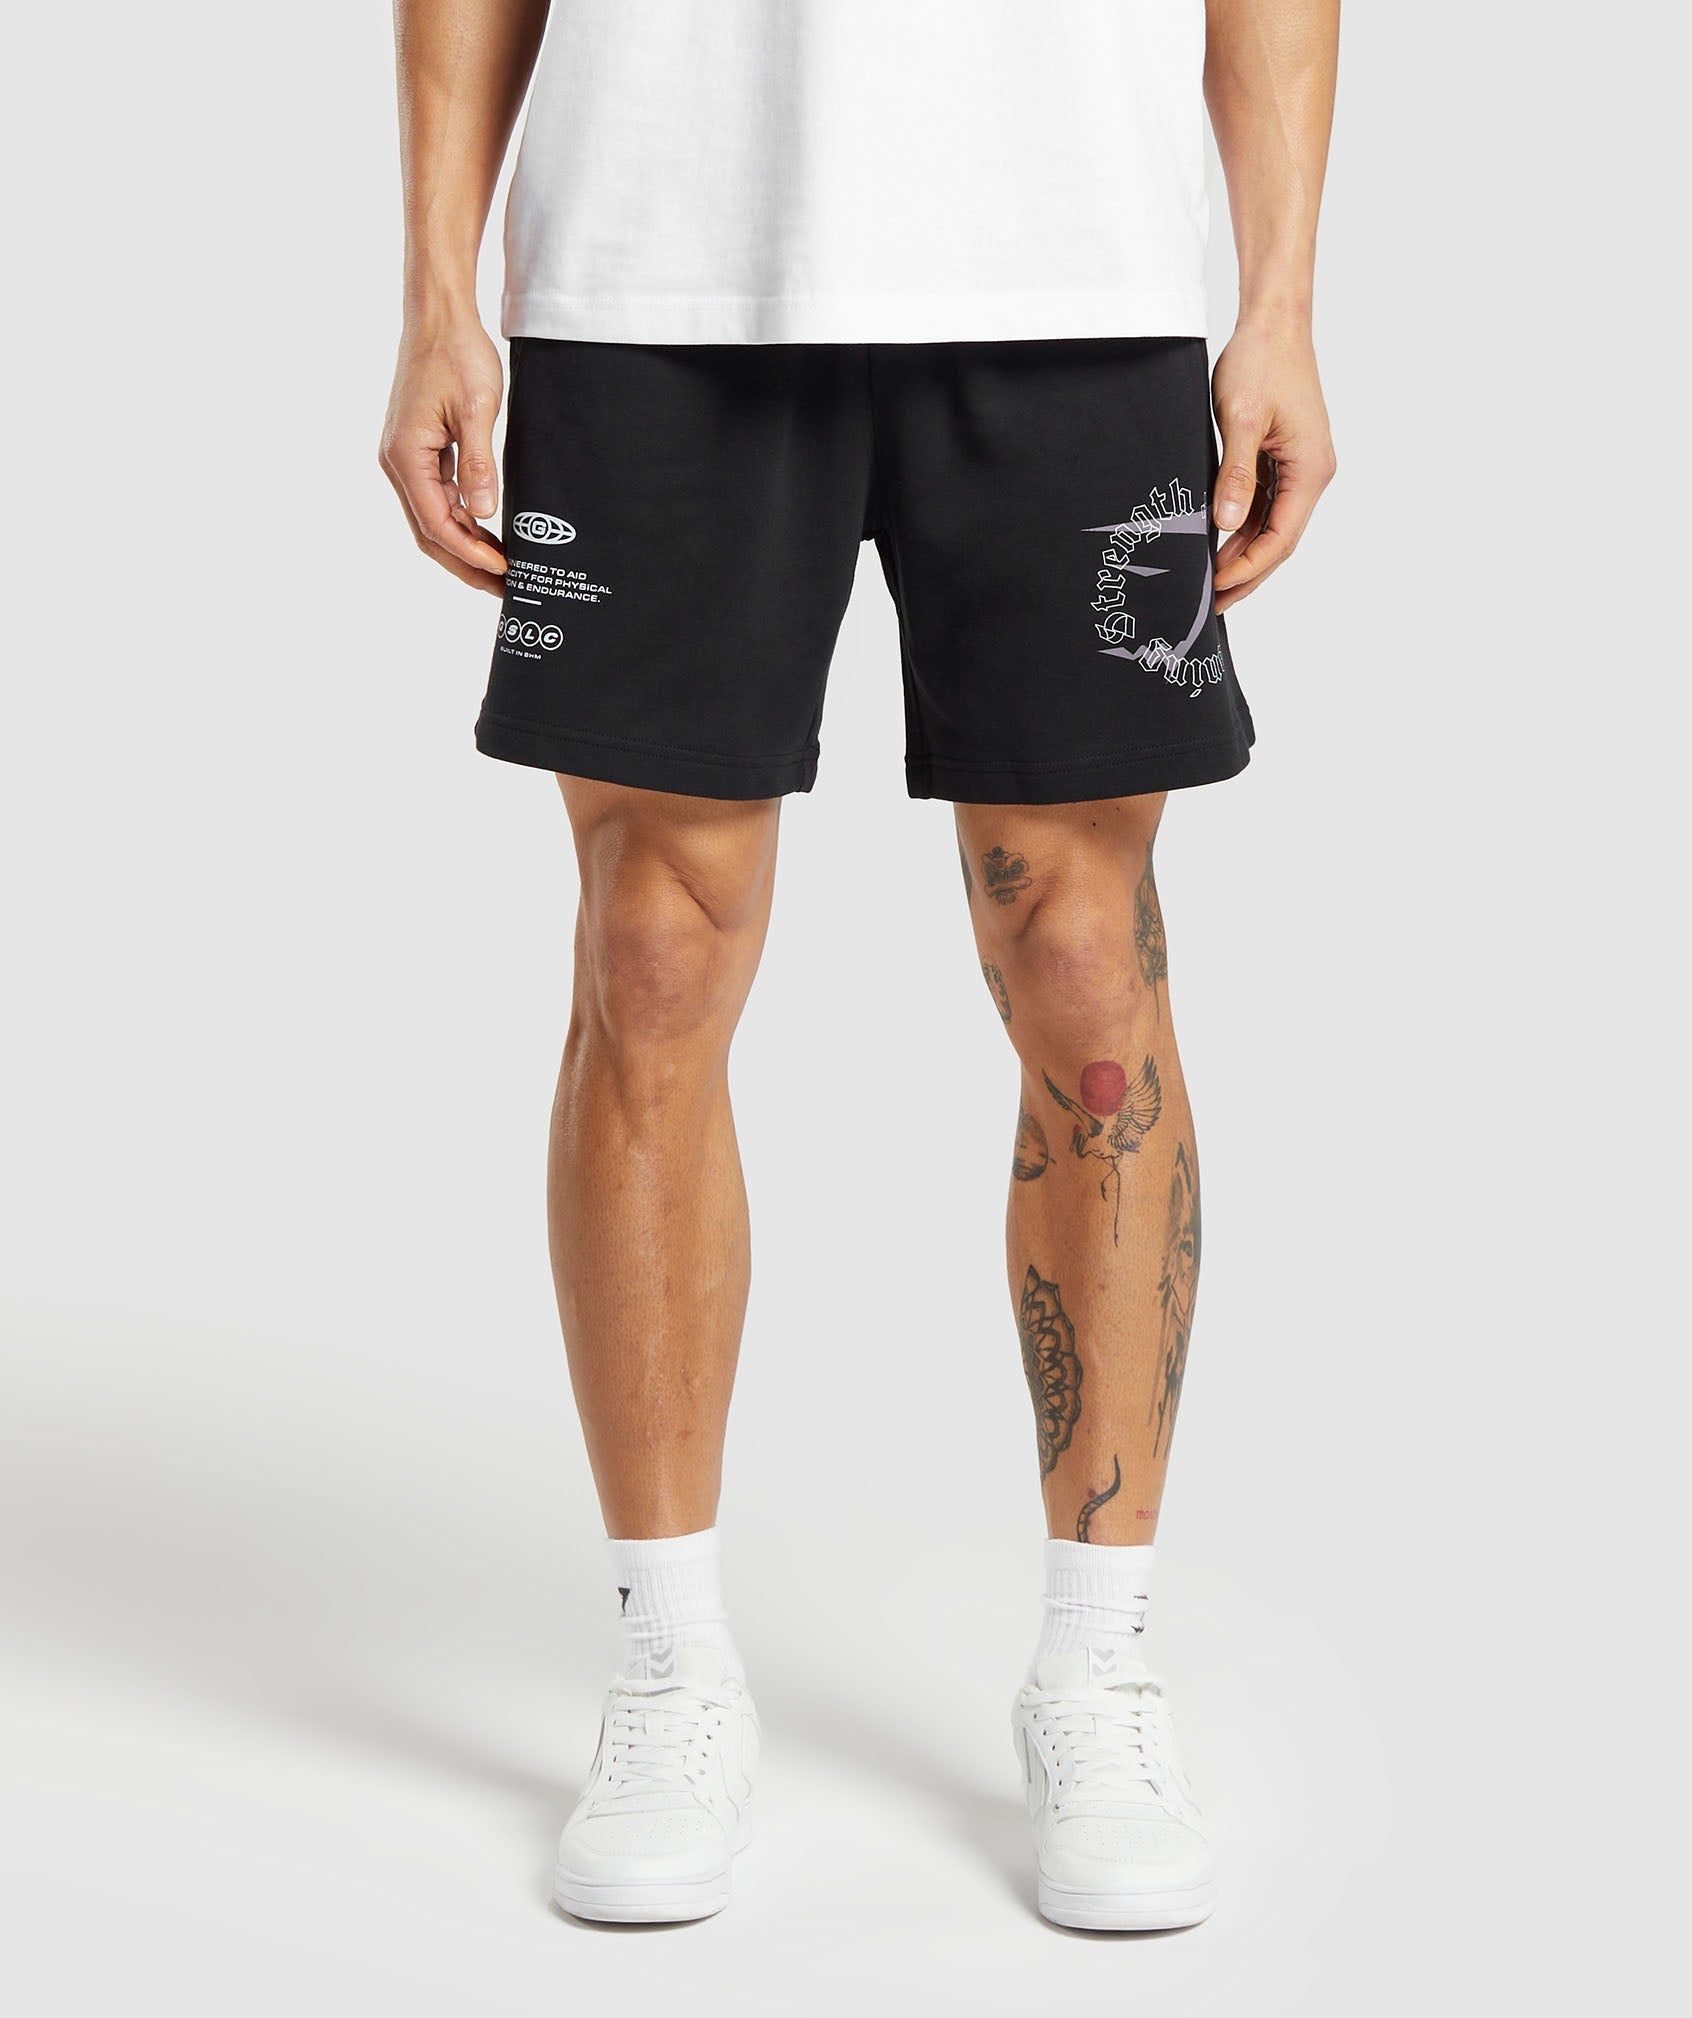 Strength and Conditioning 7" Shorts in Black - view 1